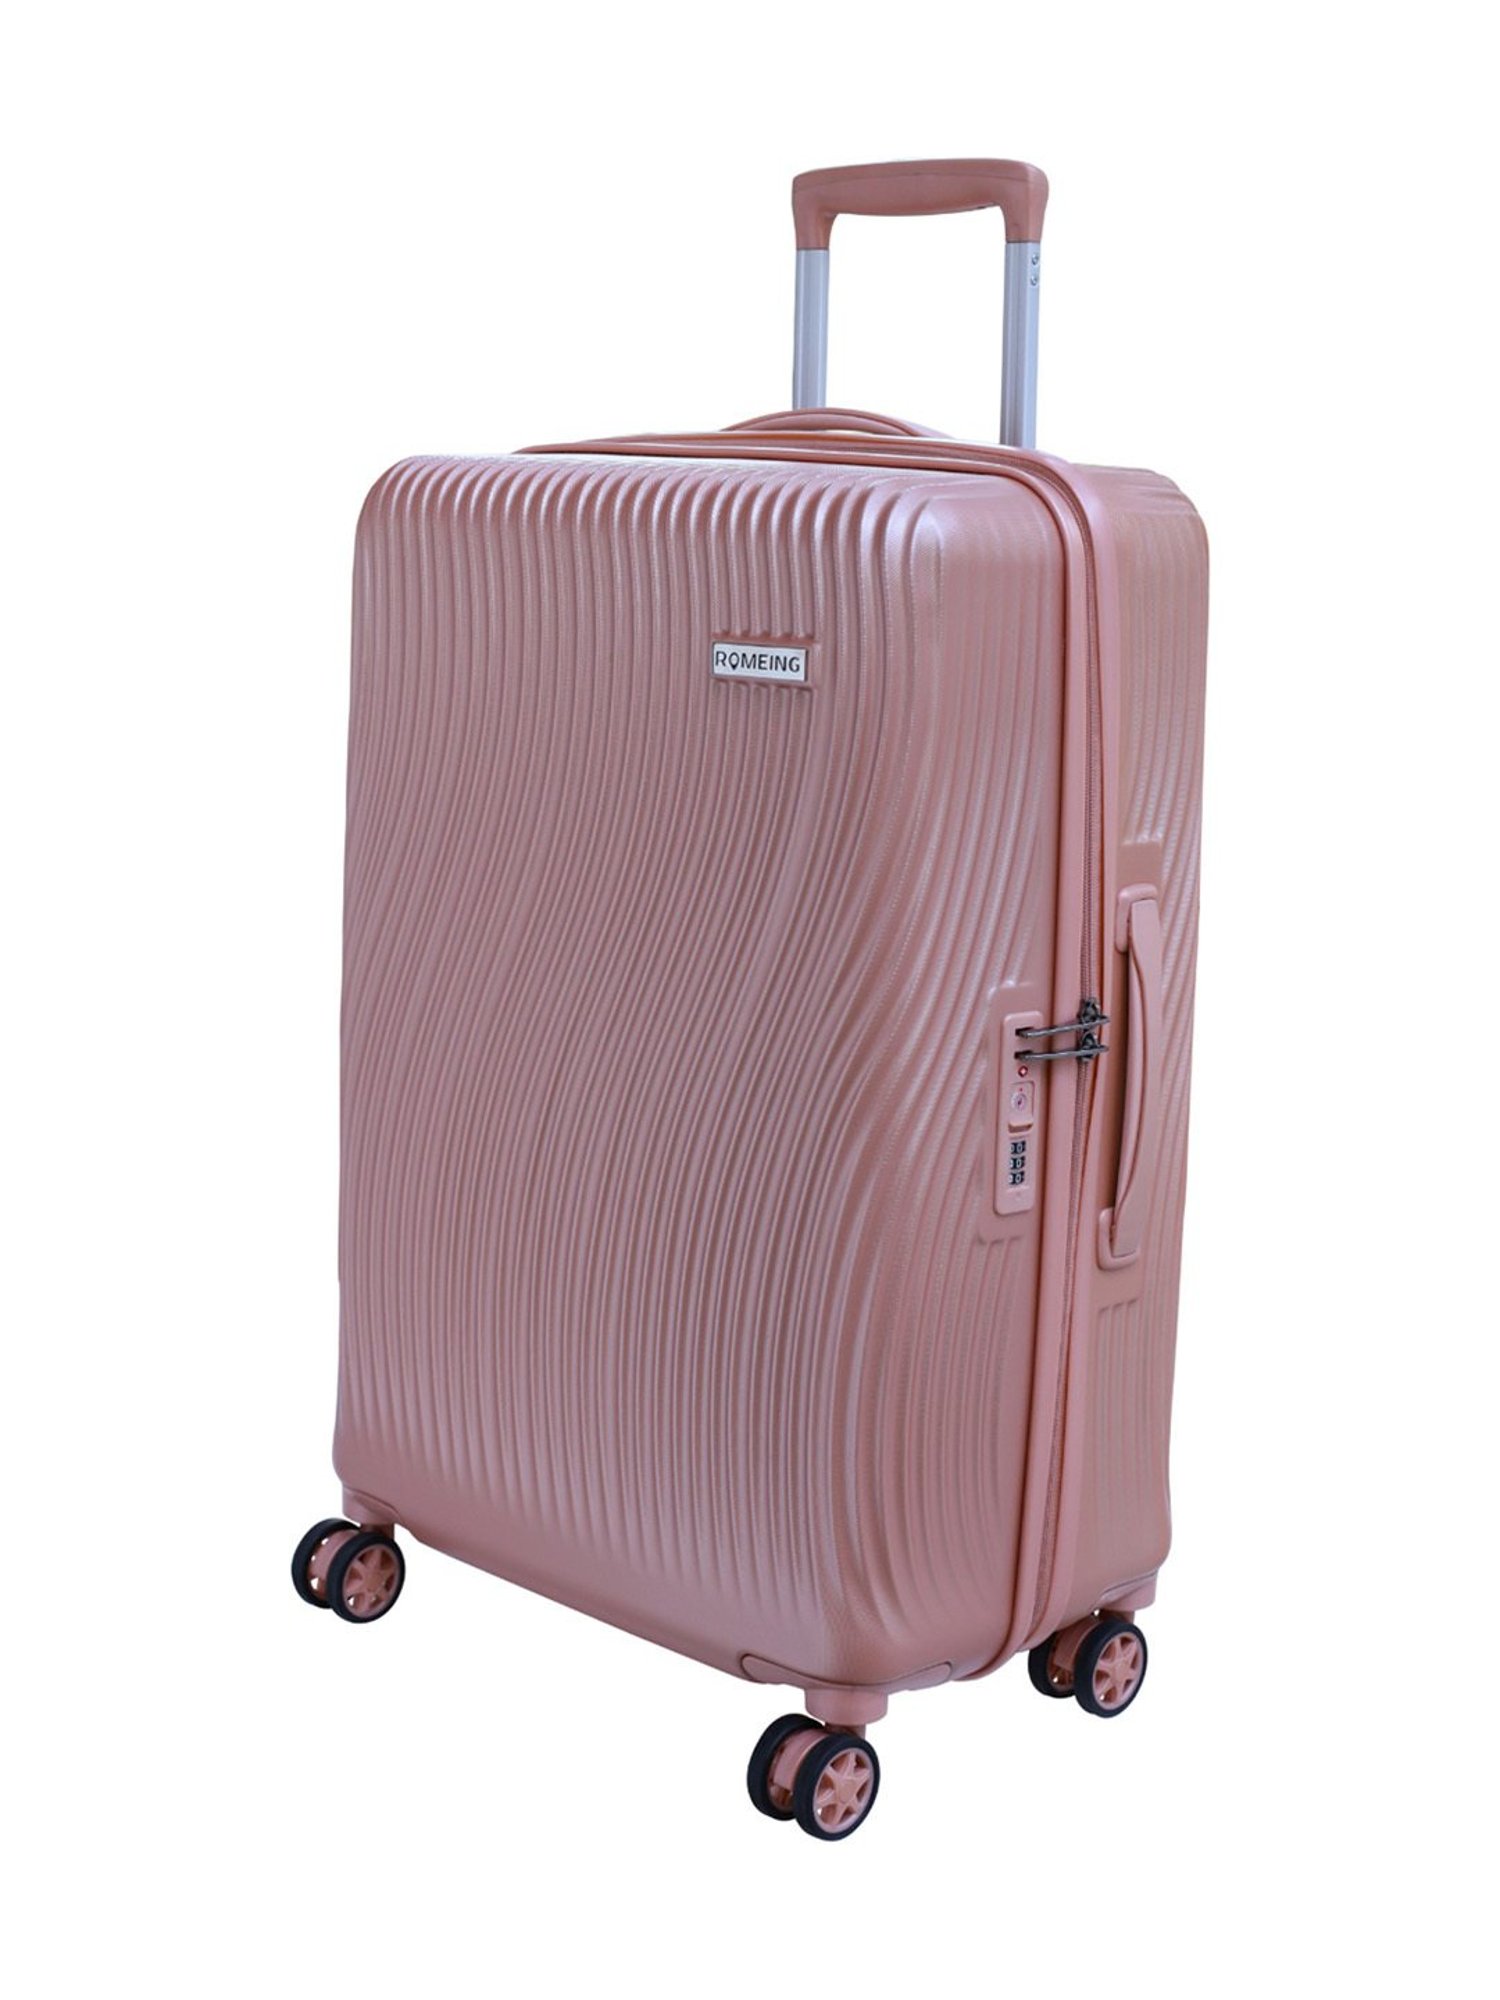 ROMEING VENICE Polycarbonate Set of 2 (55 & 65 cm) Rose Gold Hard Luggage  Trolley Bags Cabin & Check-in Set 4 Wheels - 24 inch Rose Gold - Price in  India | Flipkart.com